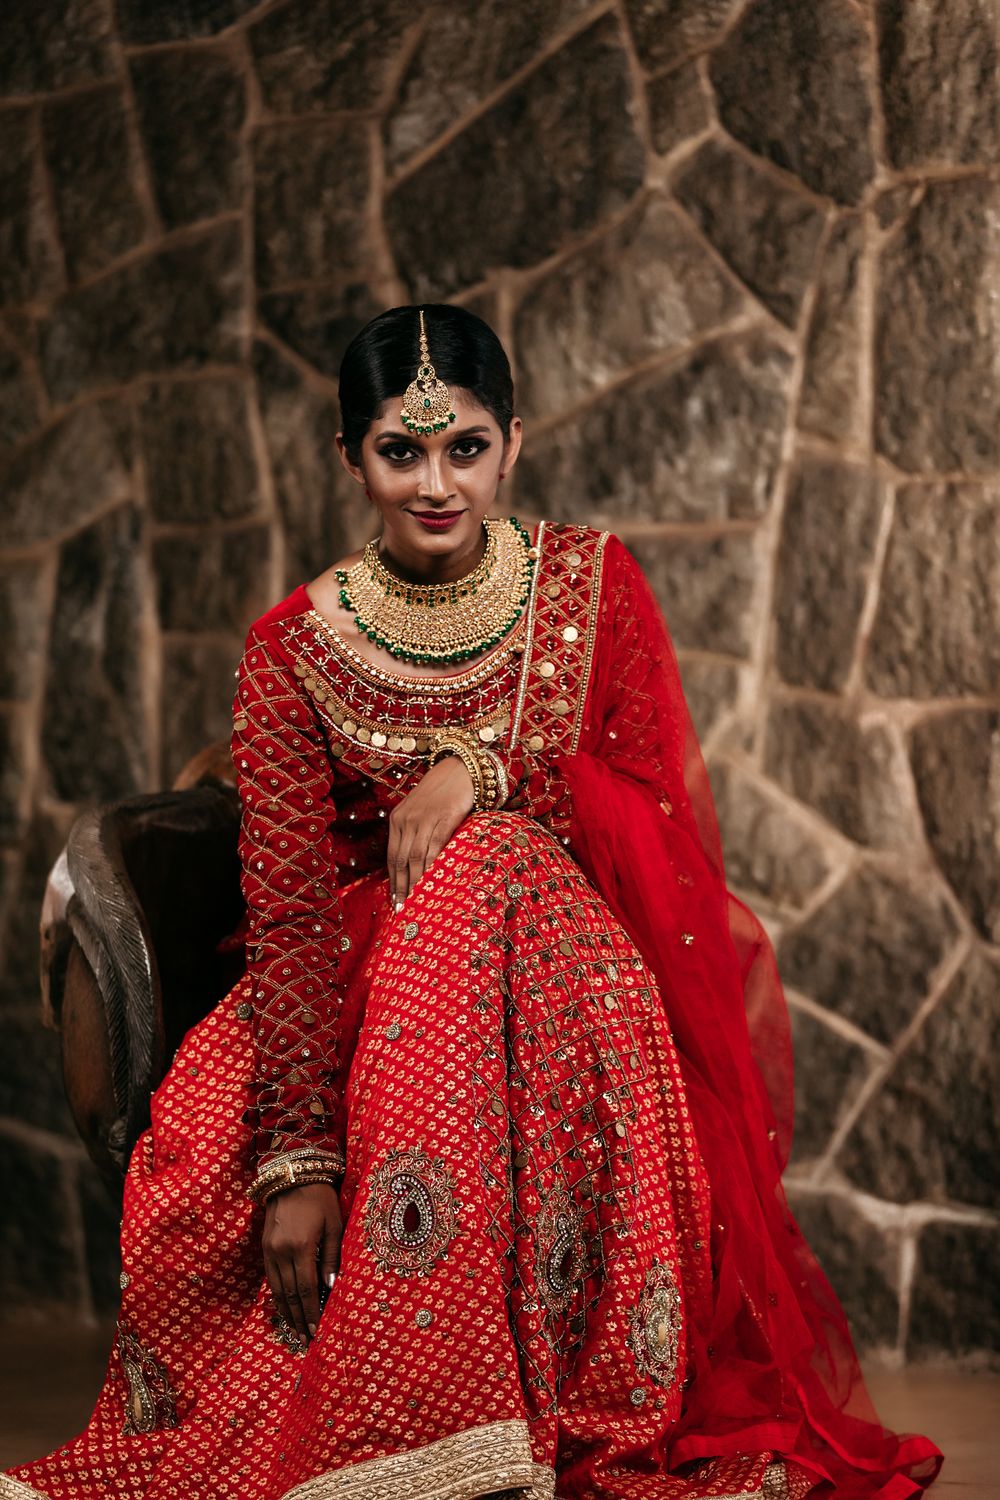 Photo From Bridal Make Up  - By Makeup Tales By Ashu